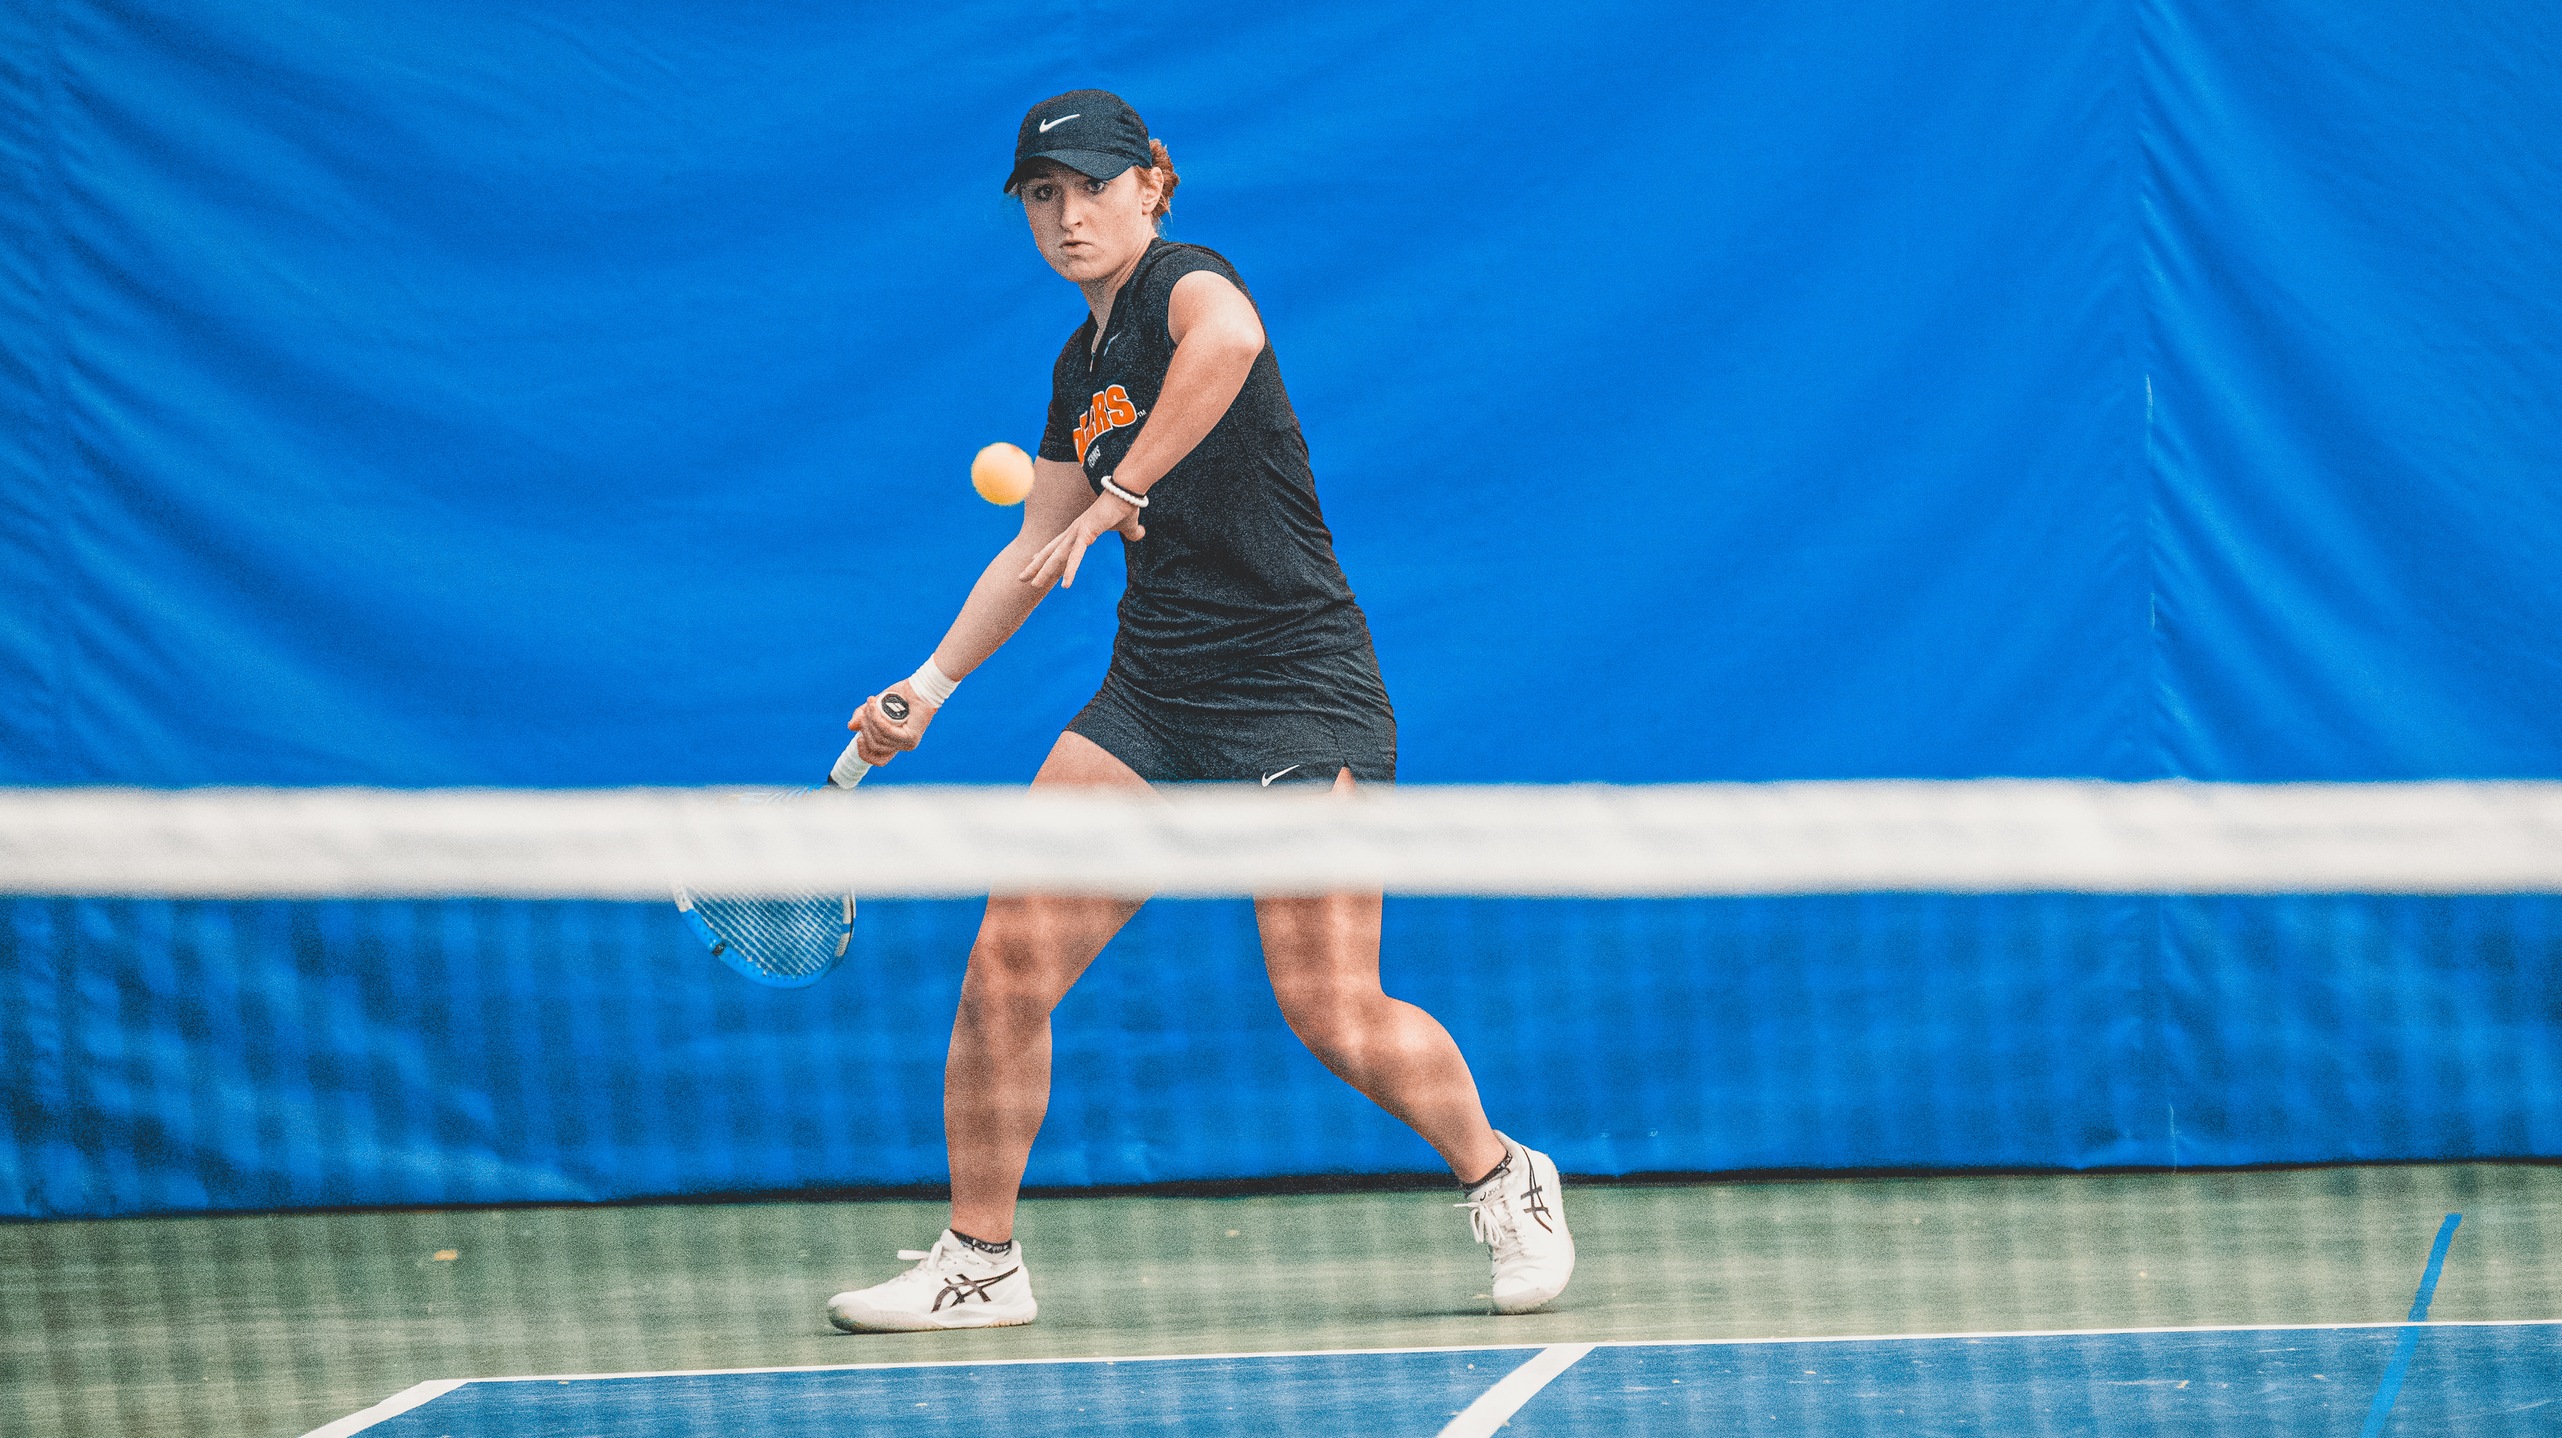 player in black playing tennis